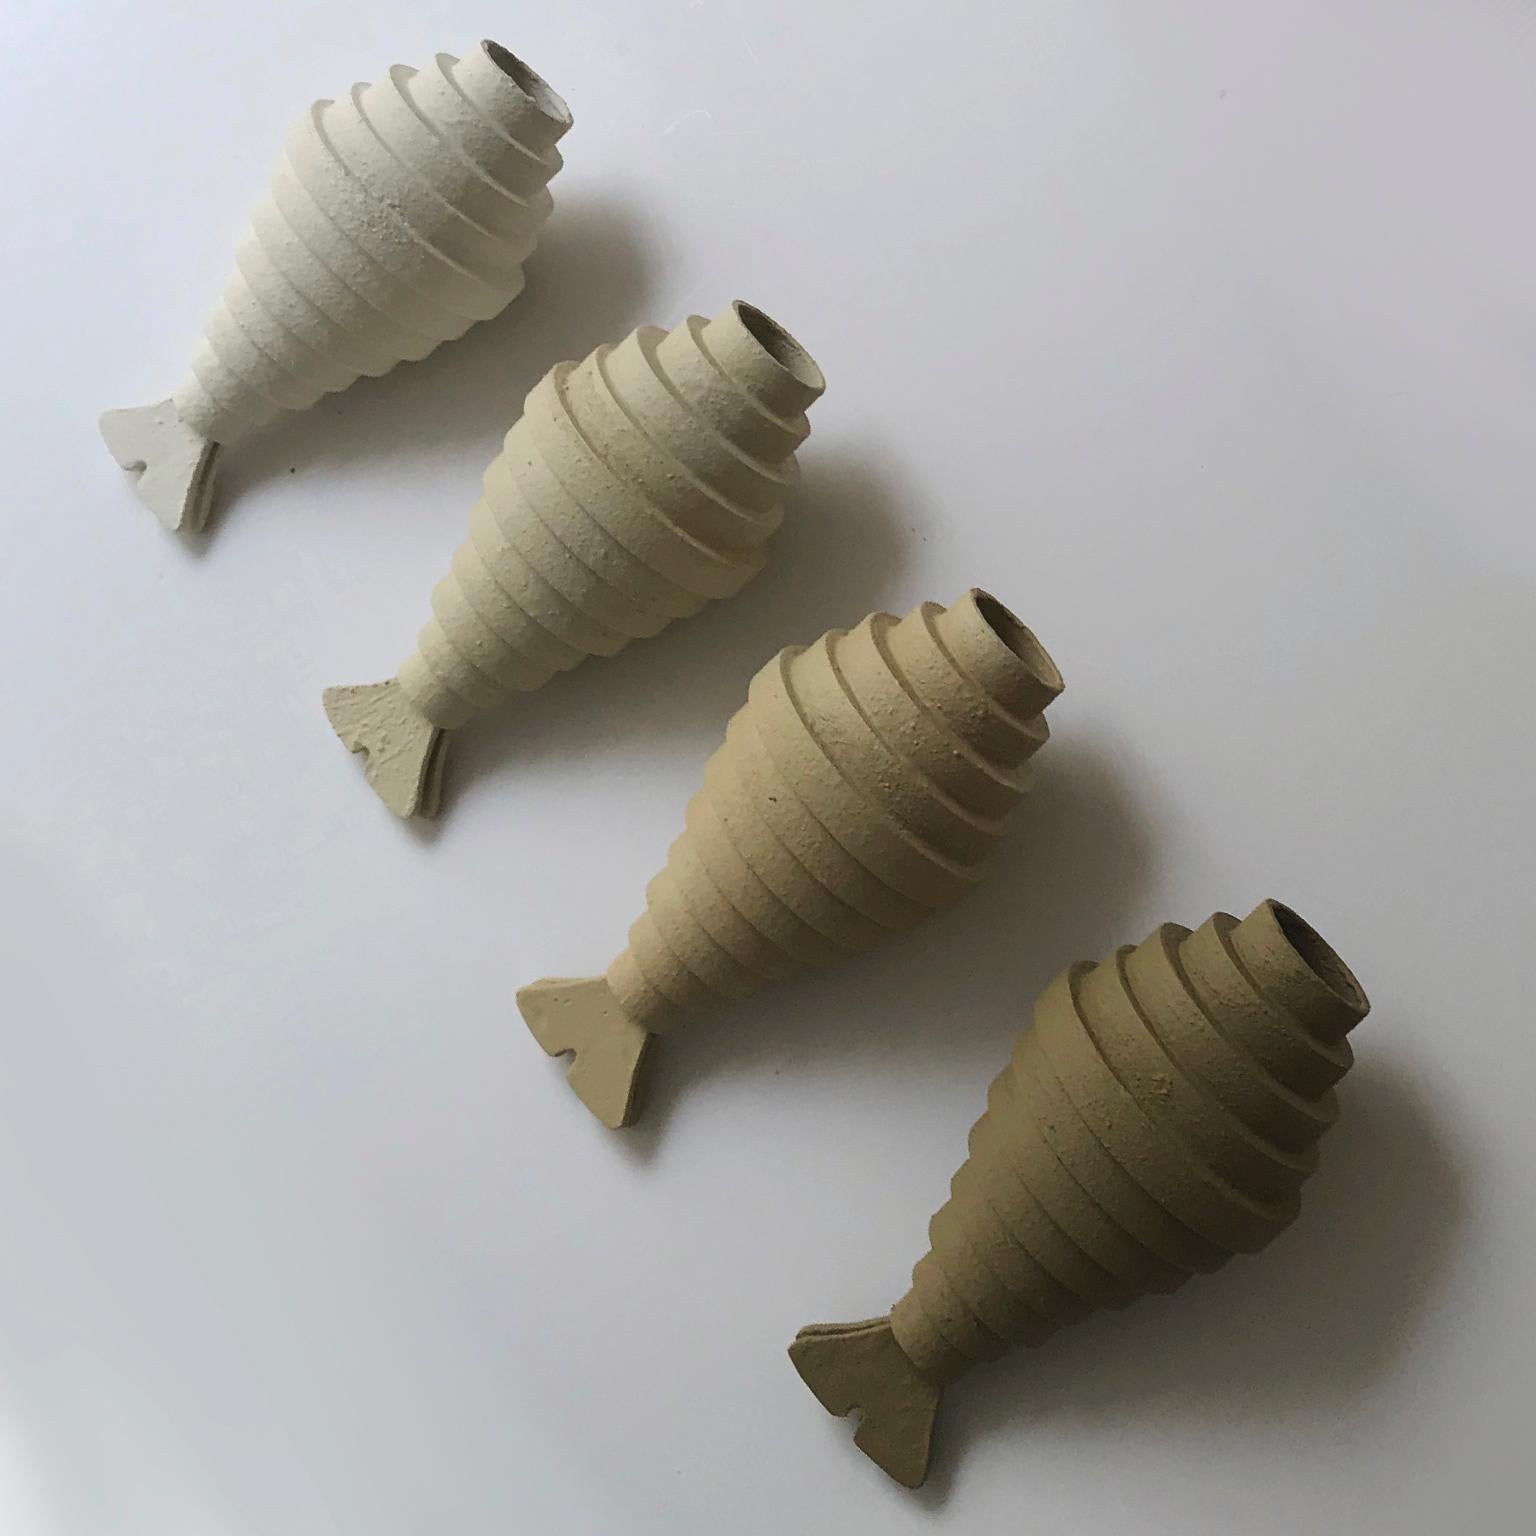 Modern Beach Sculpture Ideal For Walls    Abstract School of Fish Formations  6